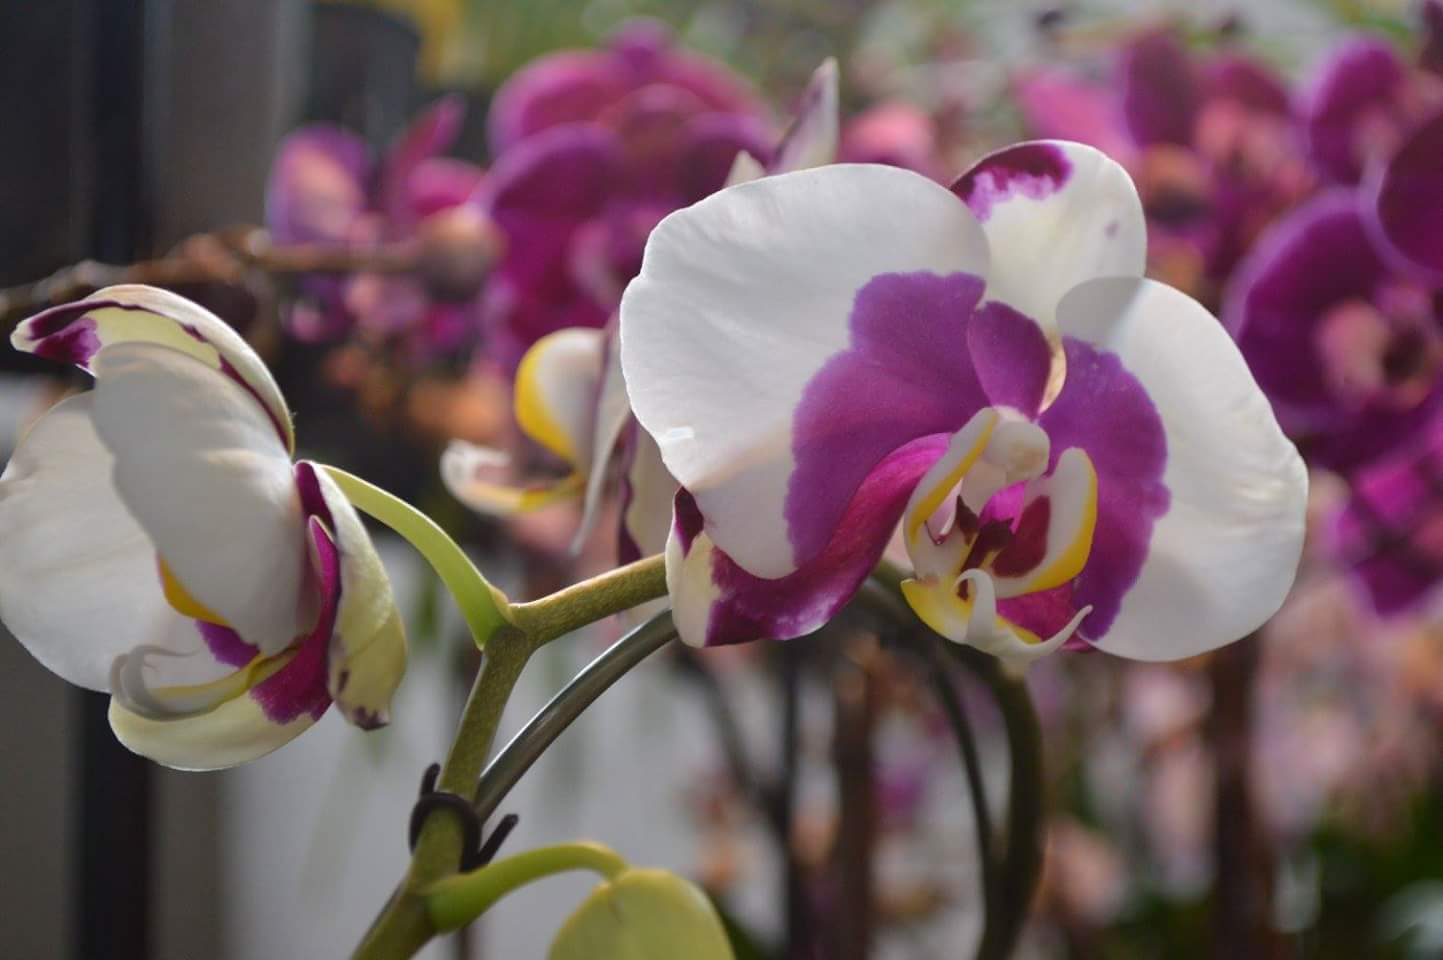 Pacific Orchid and Garden Exposition